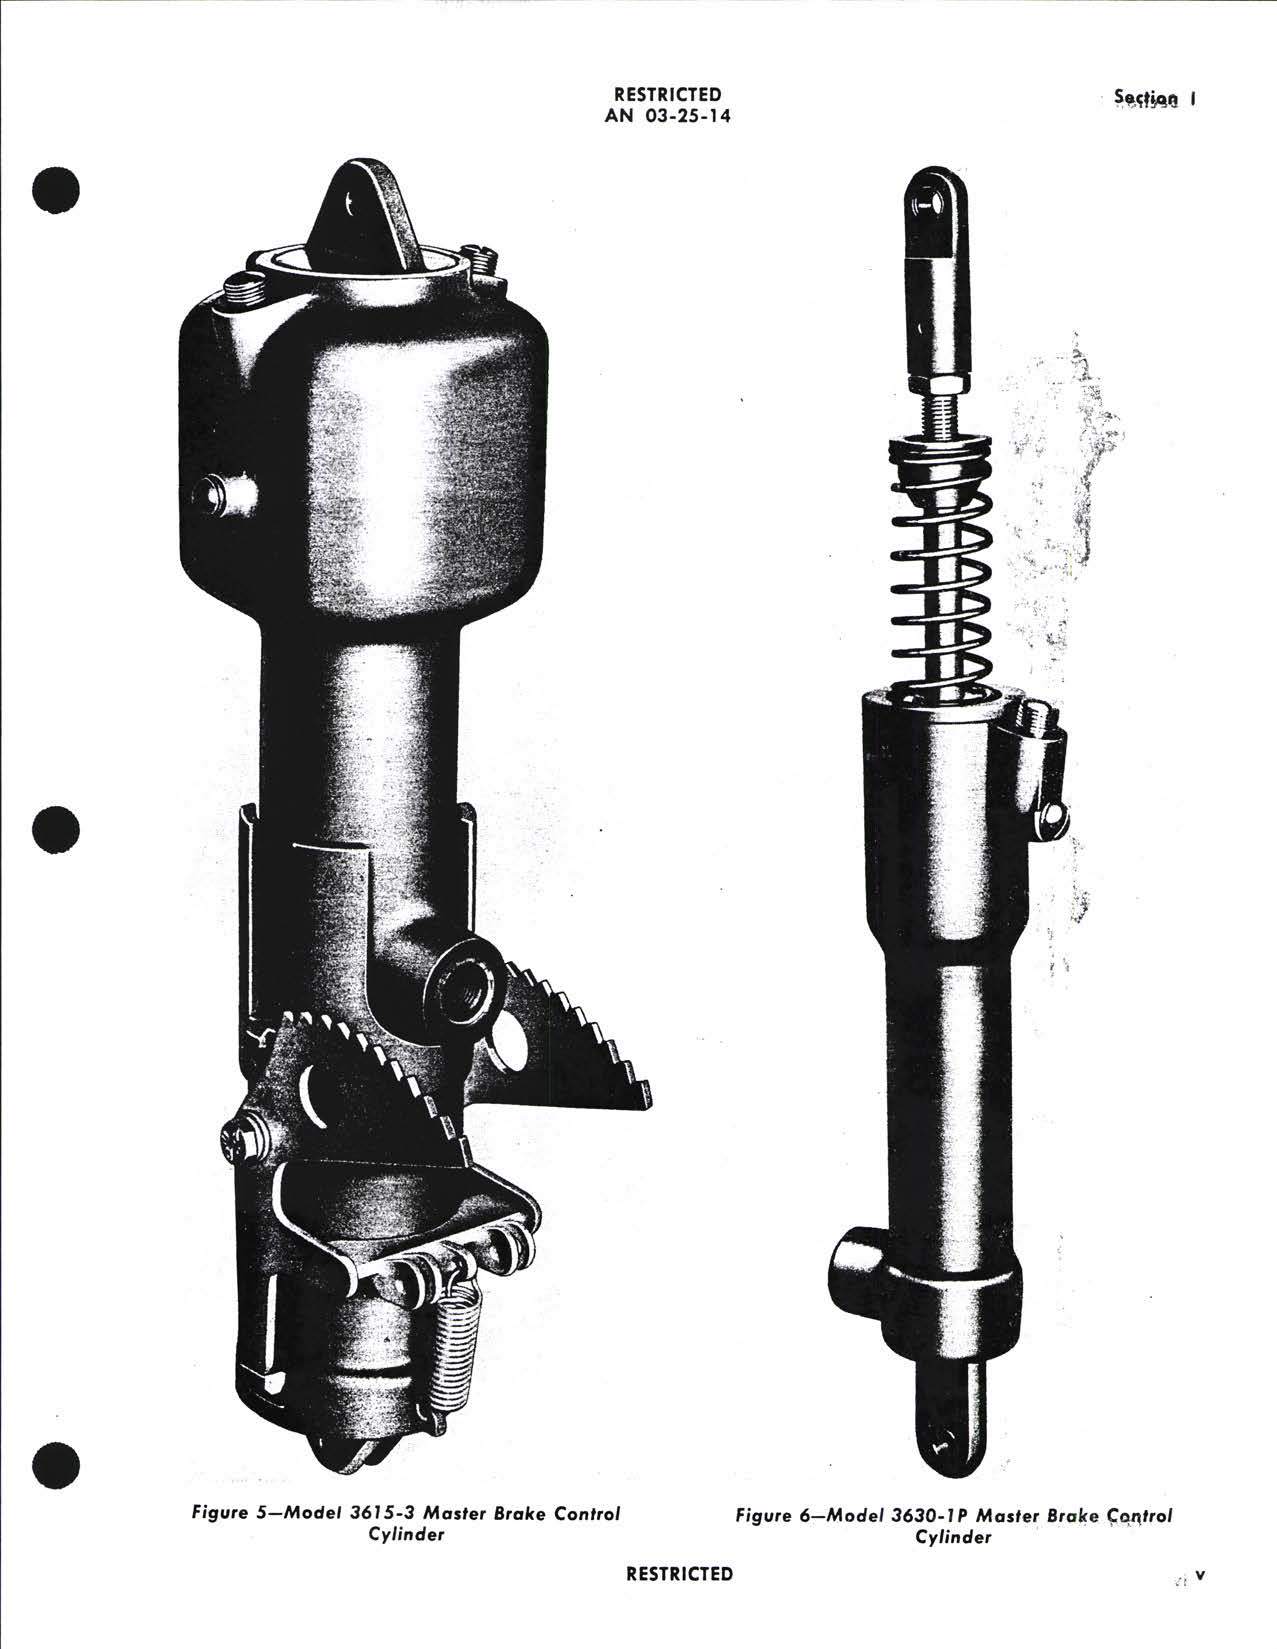 Sample page 7 from AirCorps Library document: Operation, Service, & Overhaul Instructions with Parts Catalog for Master Brake Control Cylinders